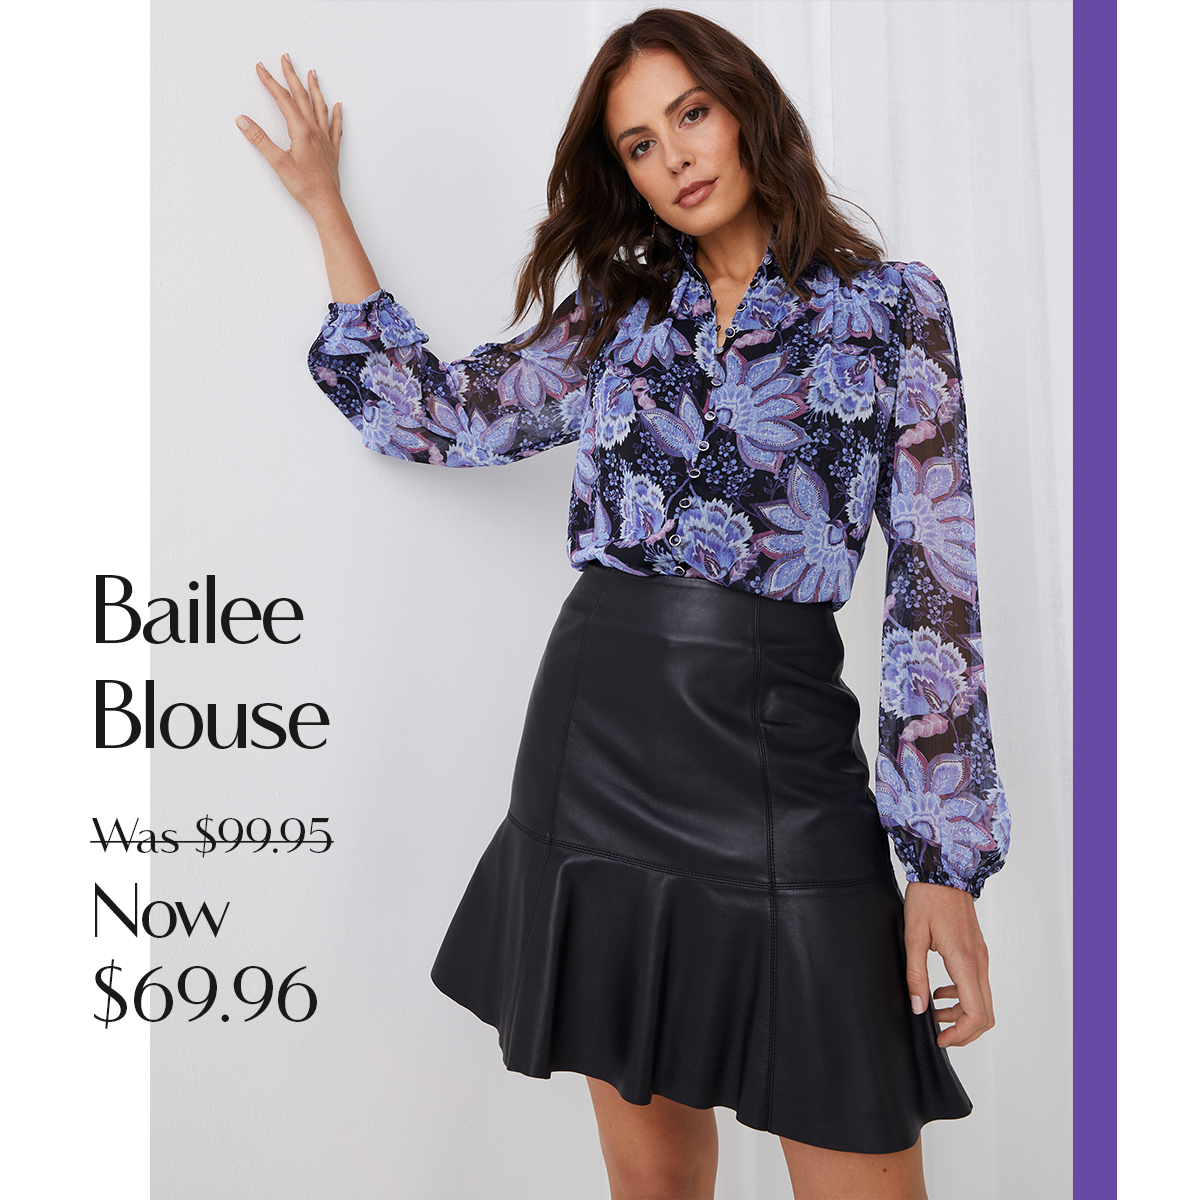 Bailee Blouse Was $99.95 Now $69.96